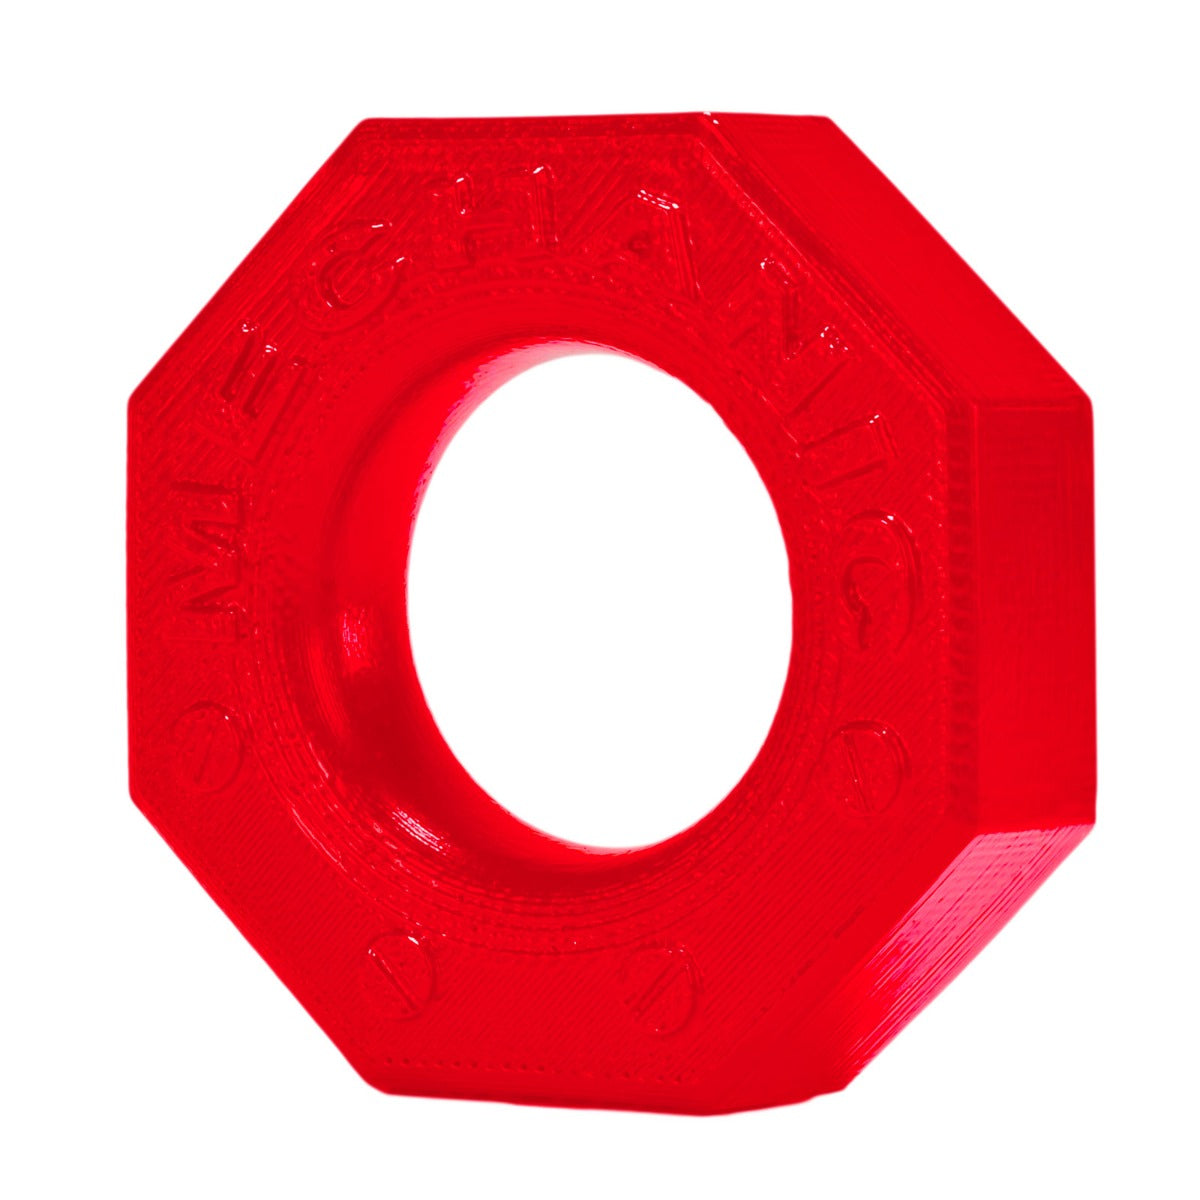 Prowler RED By Oxballs Mechanic Cock Ring Red - Simply Pleasure